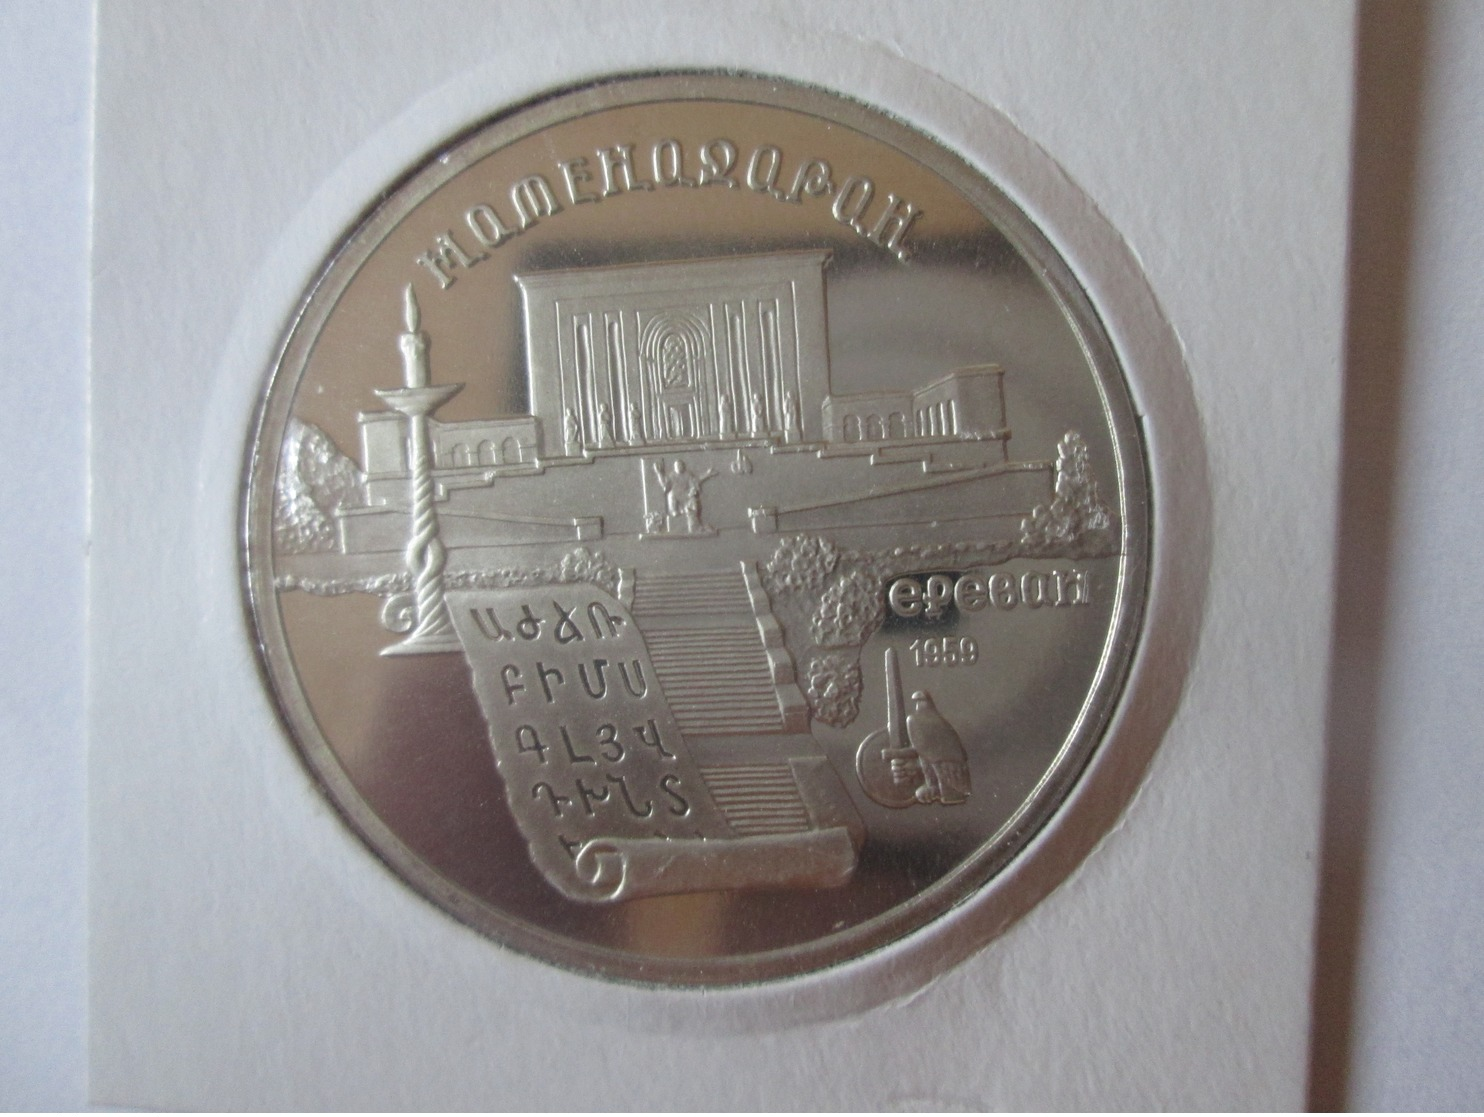 USSR/Russia 5 Rubles 1990 Proof Coin-Erevan/Armenia - Russia